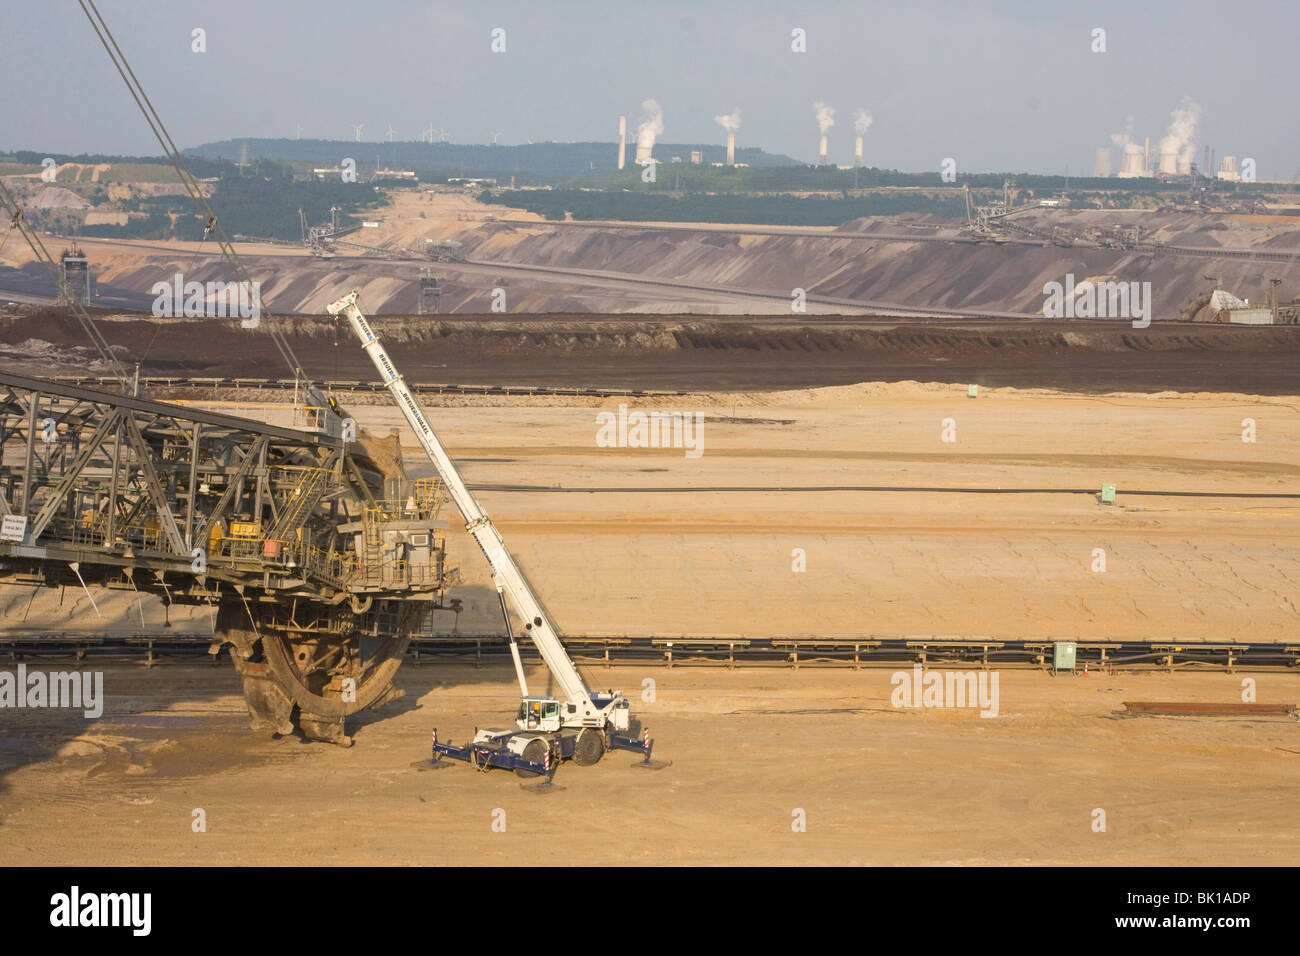 Opencast mining with coal power station Stock Photo